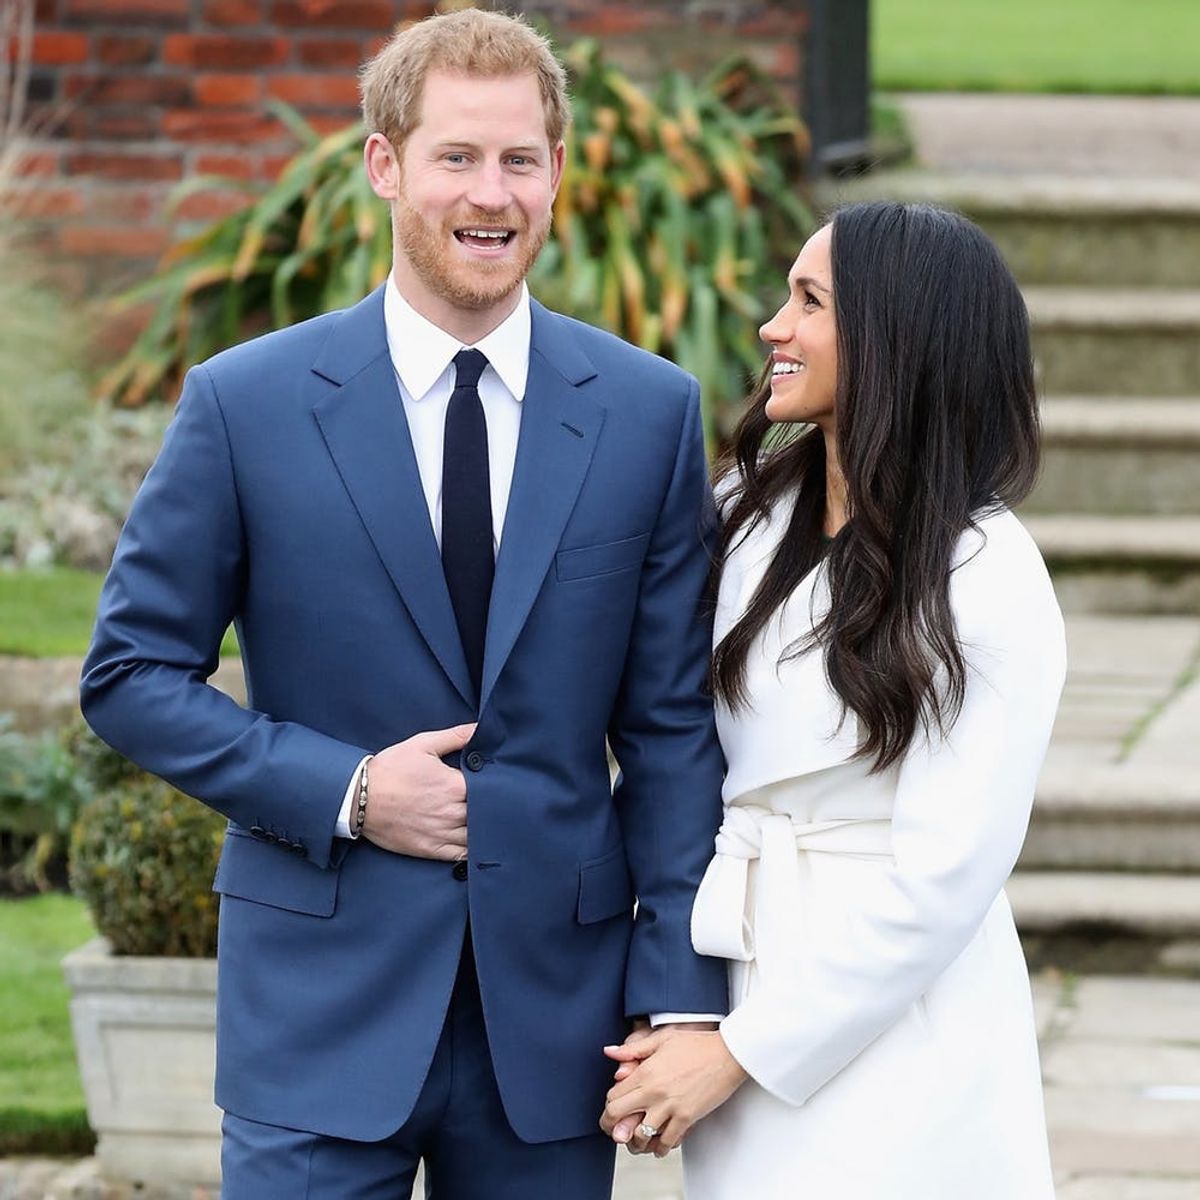 Here Are the First Details About Prince Harry and Meghan Markle’s Wedding